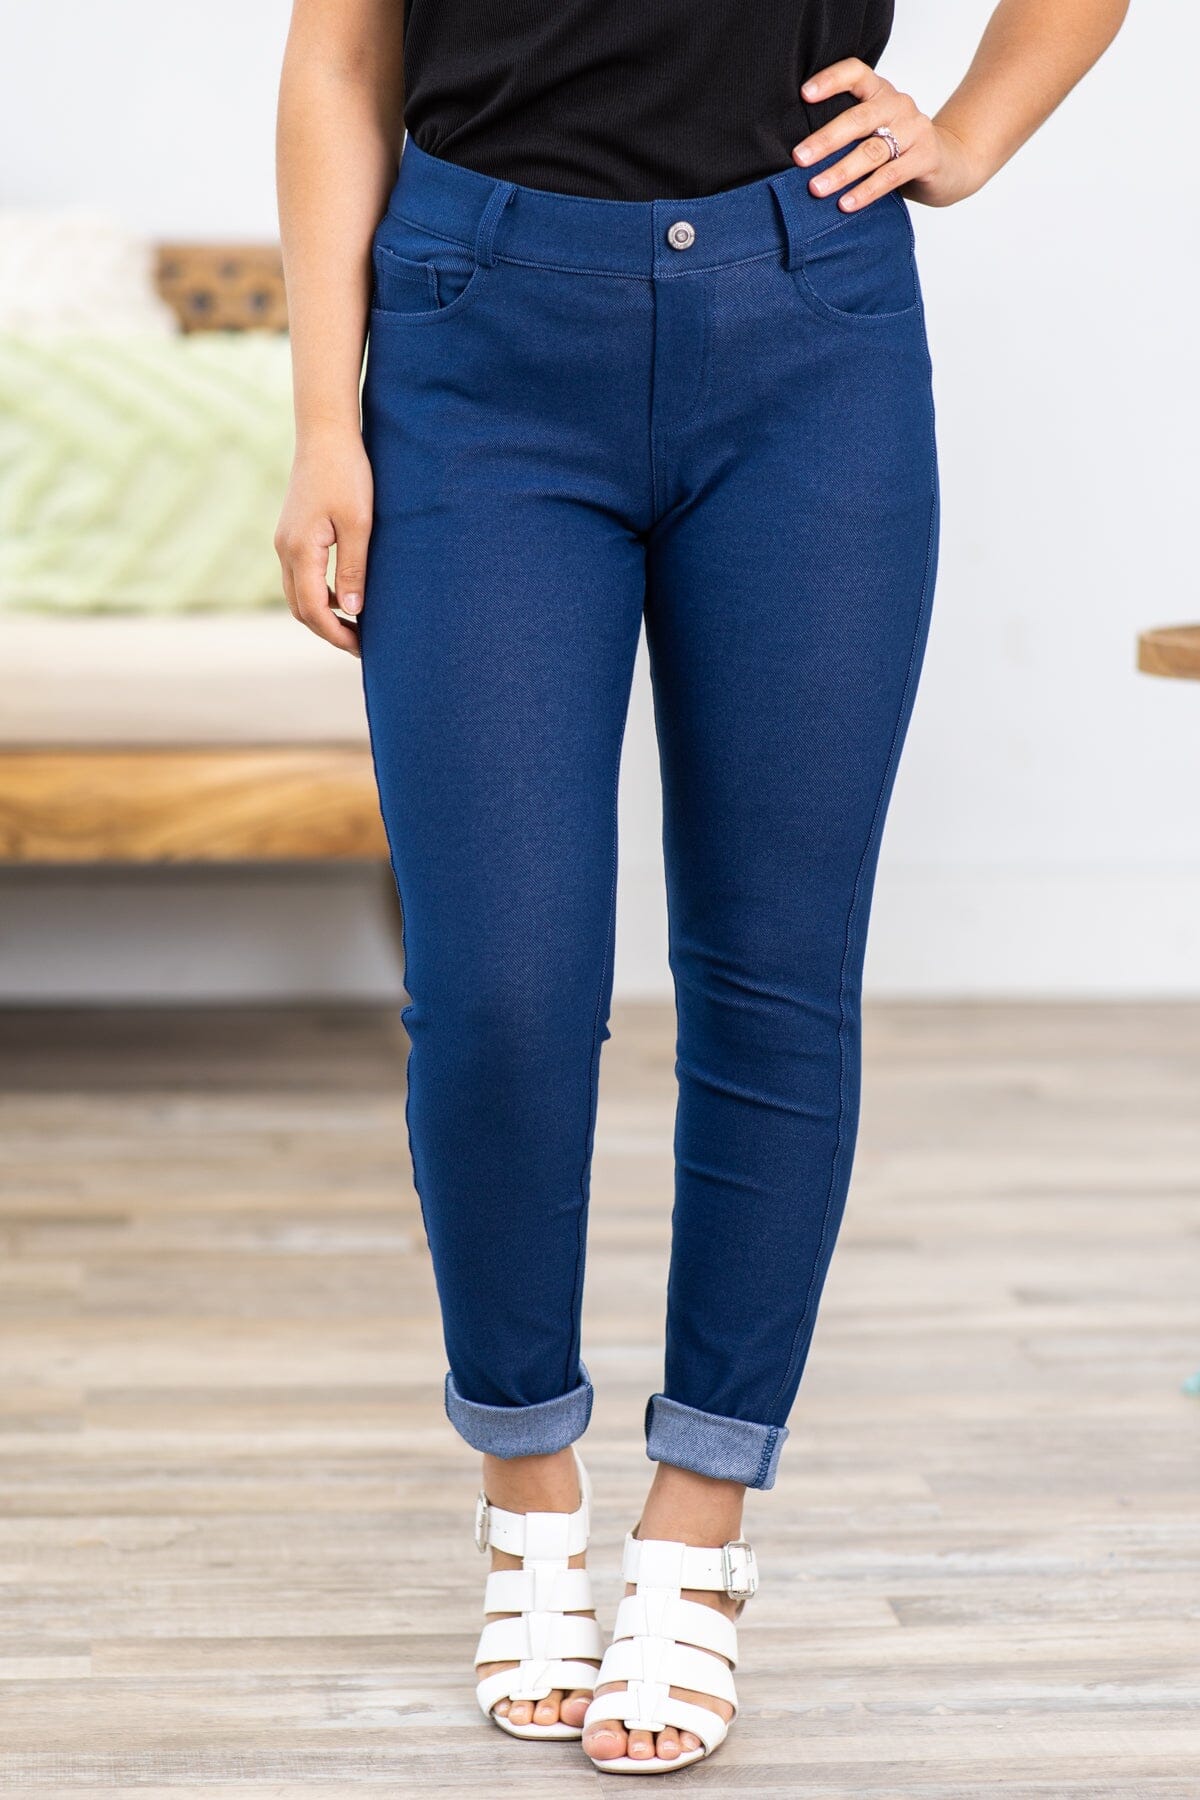 Blue Skinny Fit Jeggings - Filly Flair